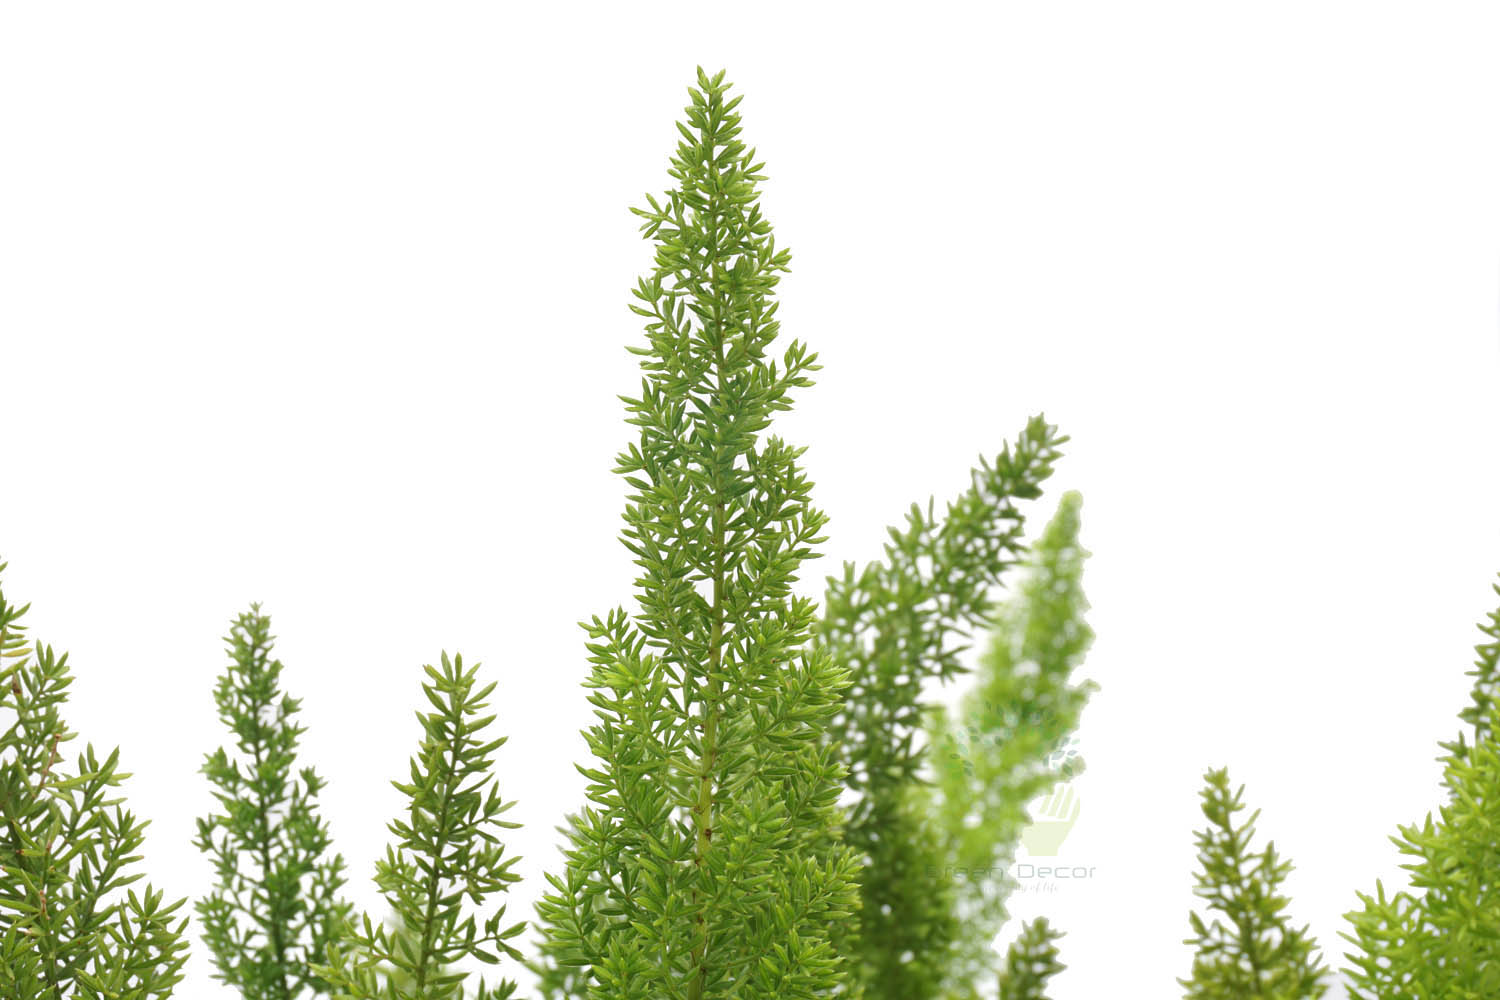 Buy Foxtail Fern Plants , White Pots and seeds in Delhi NCR by the best online nursery shop Greendecor.